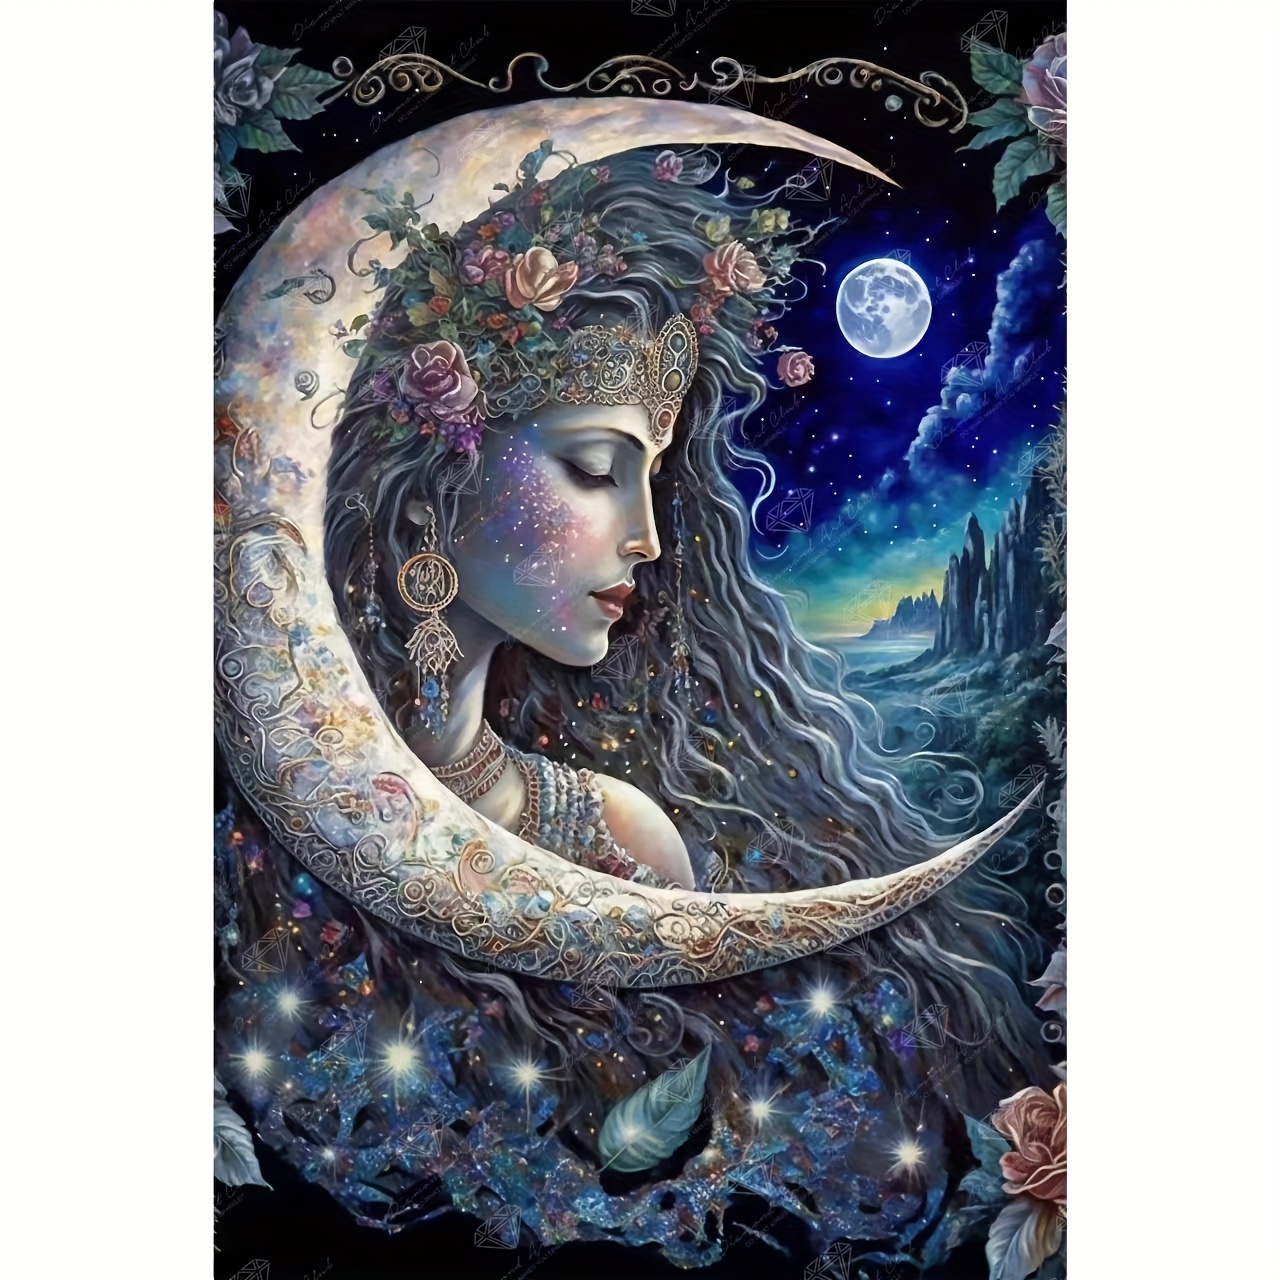 

Moon Goddess Full Drill Diy 5d Round Diamond Painting Kit, 30x40cm Canvas Art, Embroidery Cross Stitch Arts Craft For Home Wall Decor, Diamond Art Perfect For Relaxation And Home Gift